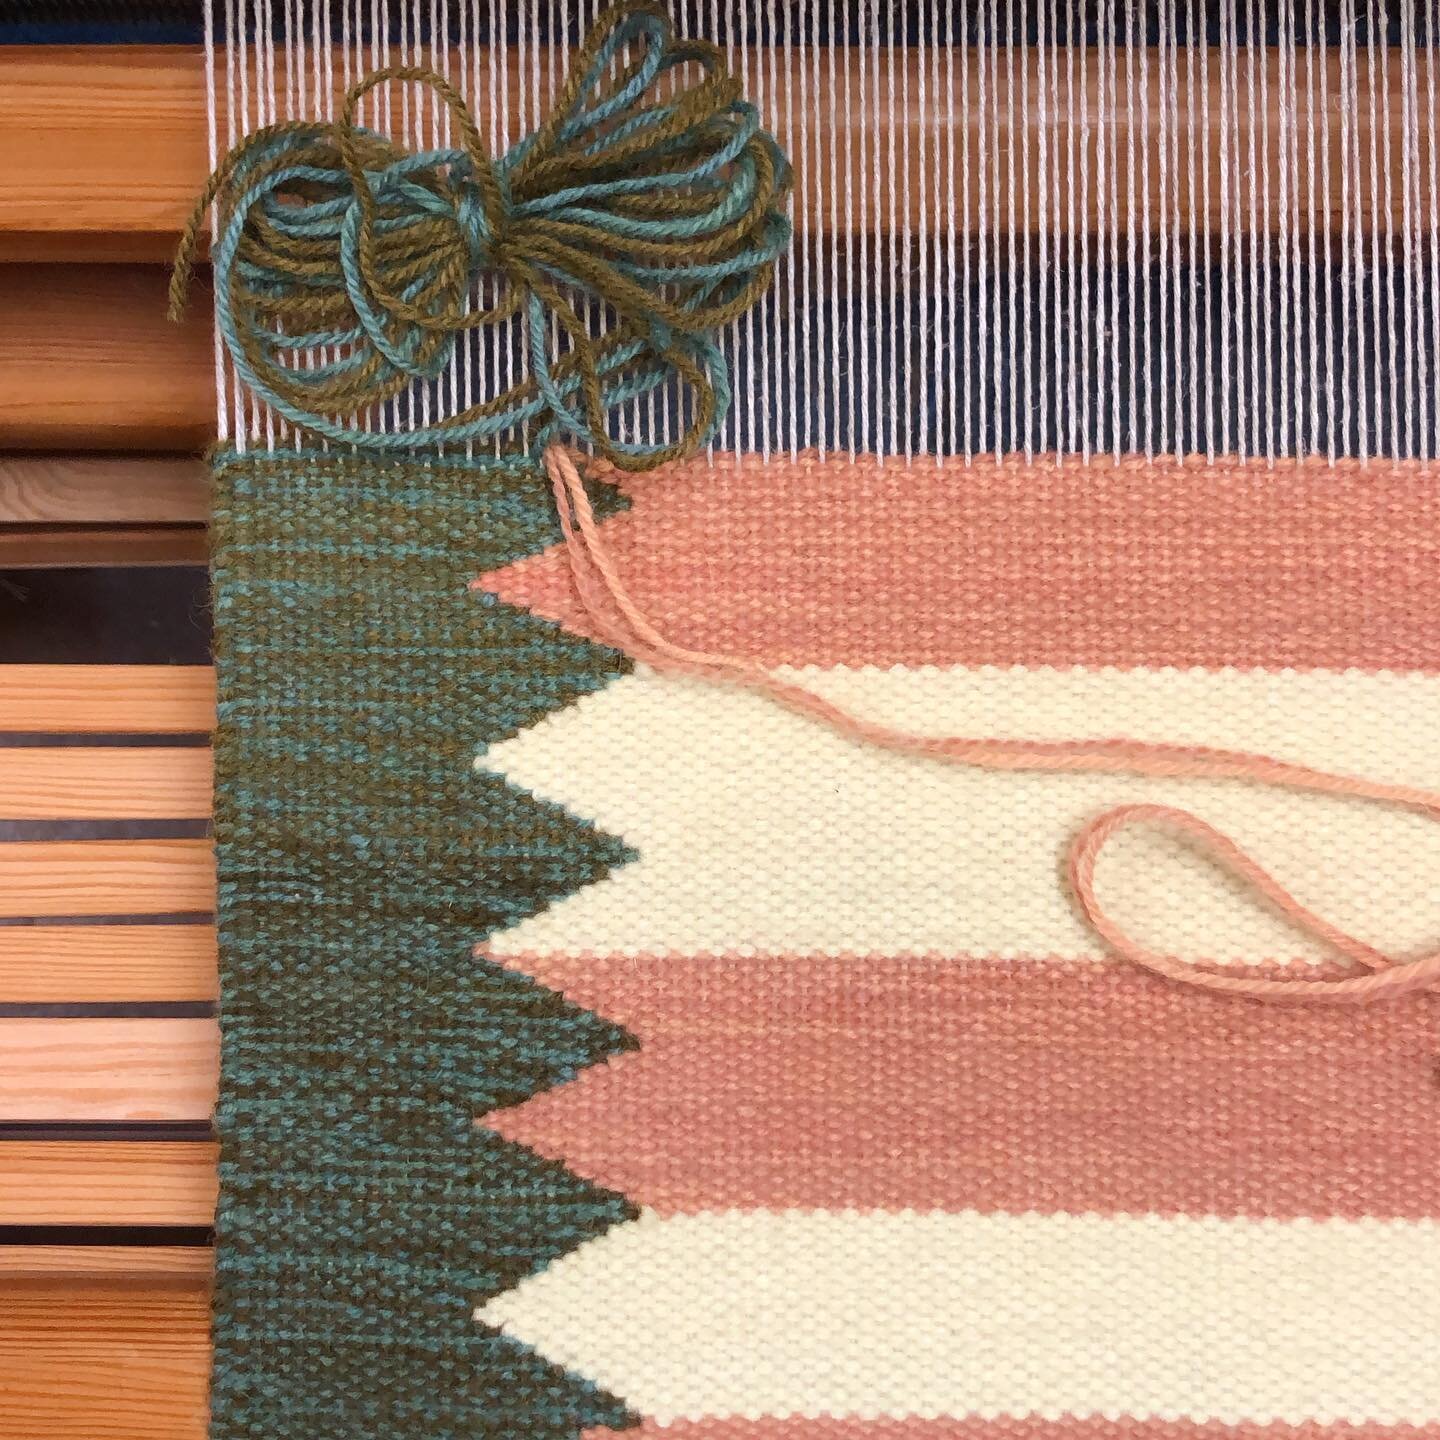 Hey hey from this zig zaggy, mind-bending rug! It&rsquo;s my favorite of the naturally dyed rugs so far. My painter brain is really digging playing with hue and value by holding together multiple strands of yarn, and my inner Virgo is trying hard to 